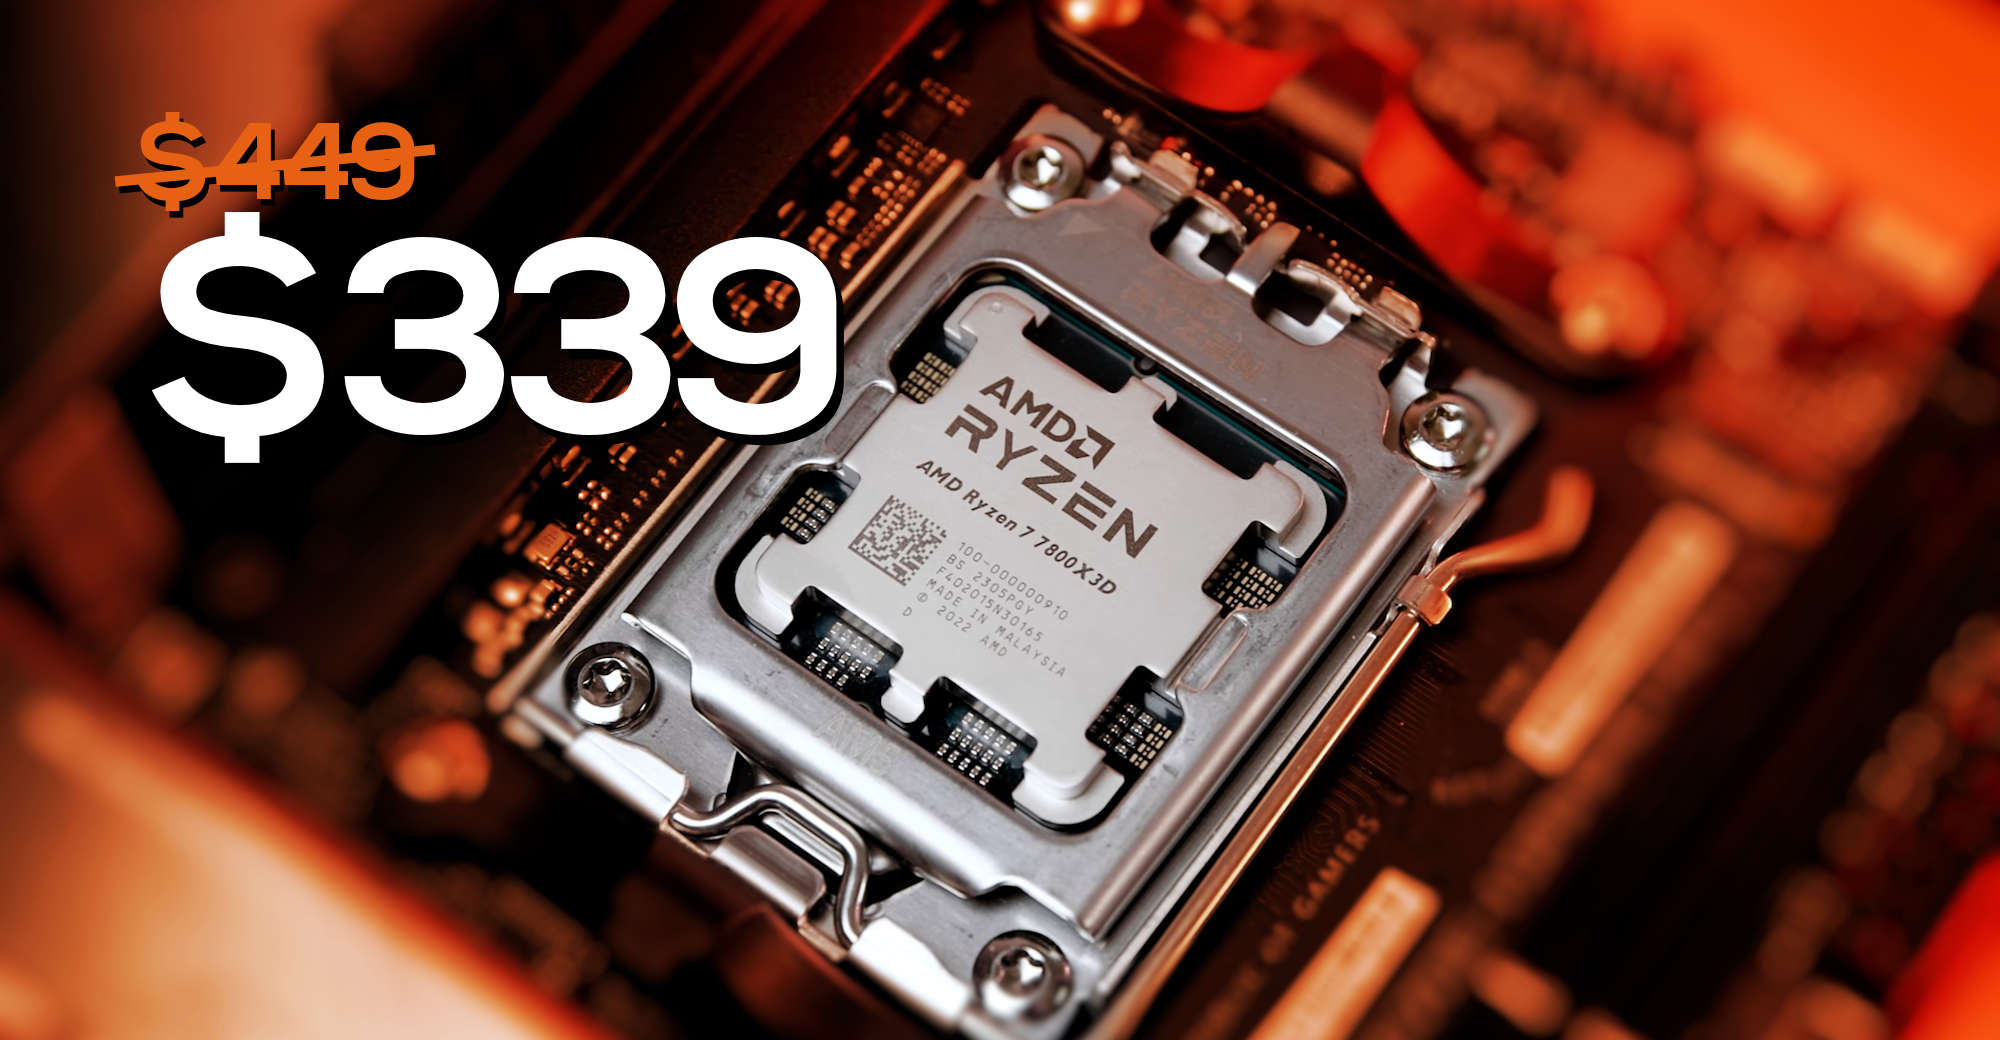 AMD Ryzen 7 7800X3D Review: Return Of The PC Gaming King - Page 2